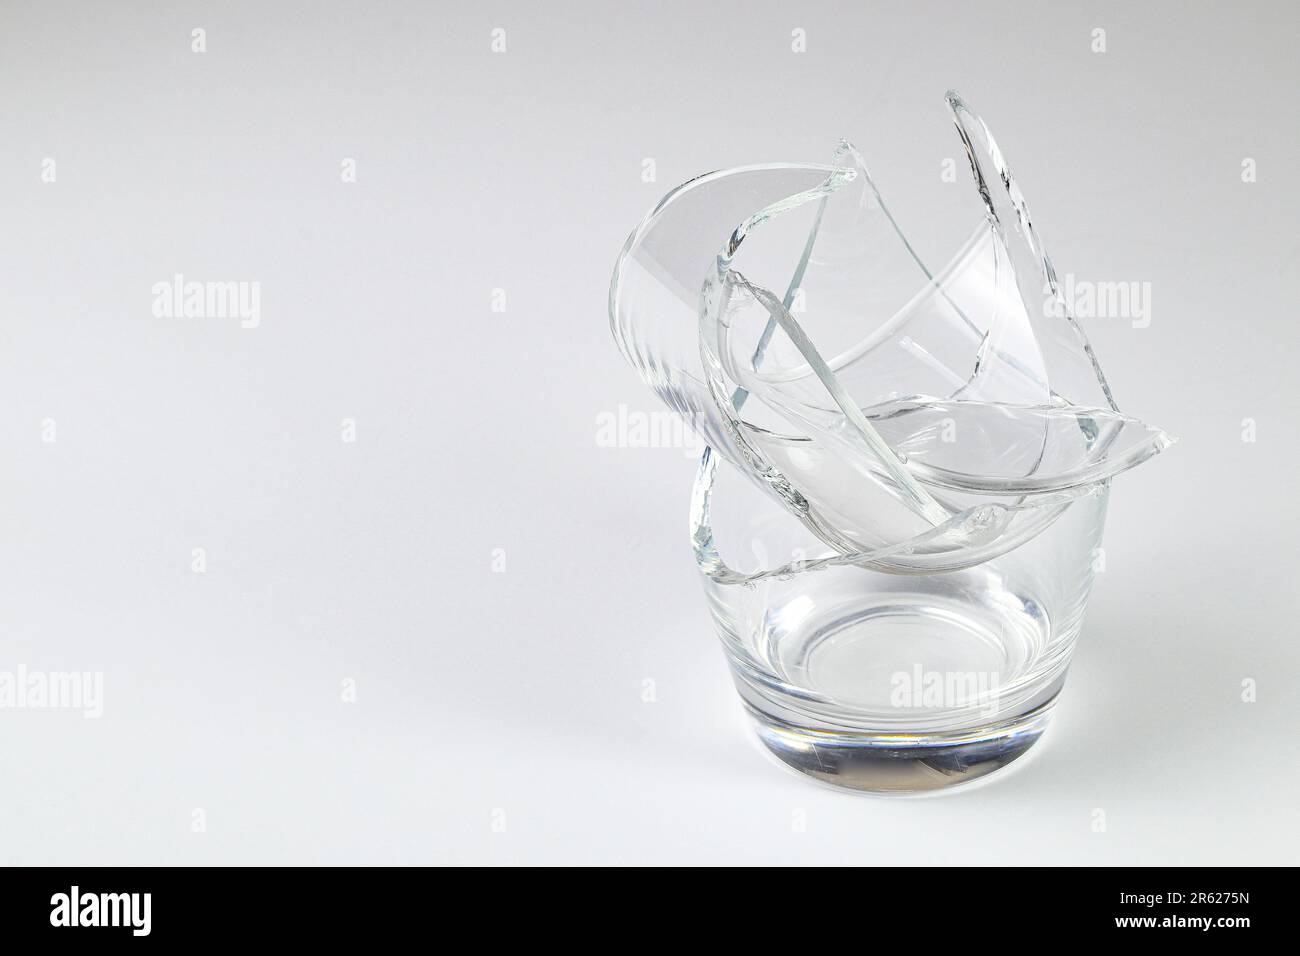 Parts of the broken cup jar glass isolated on white background